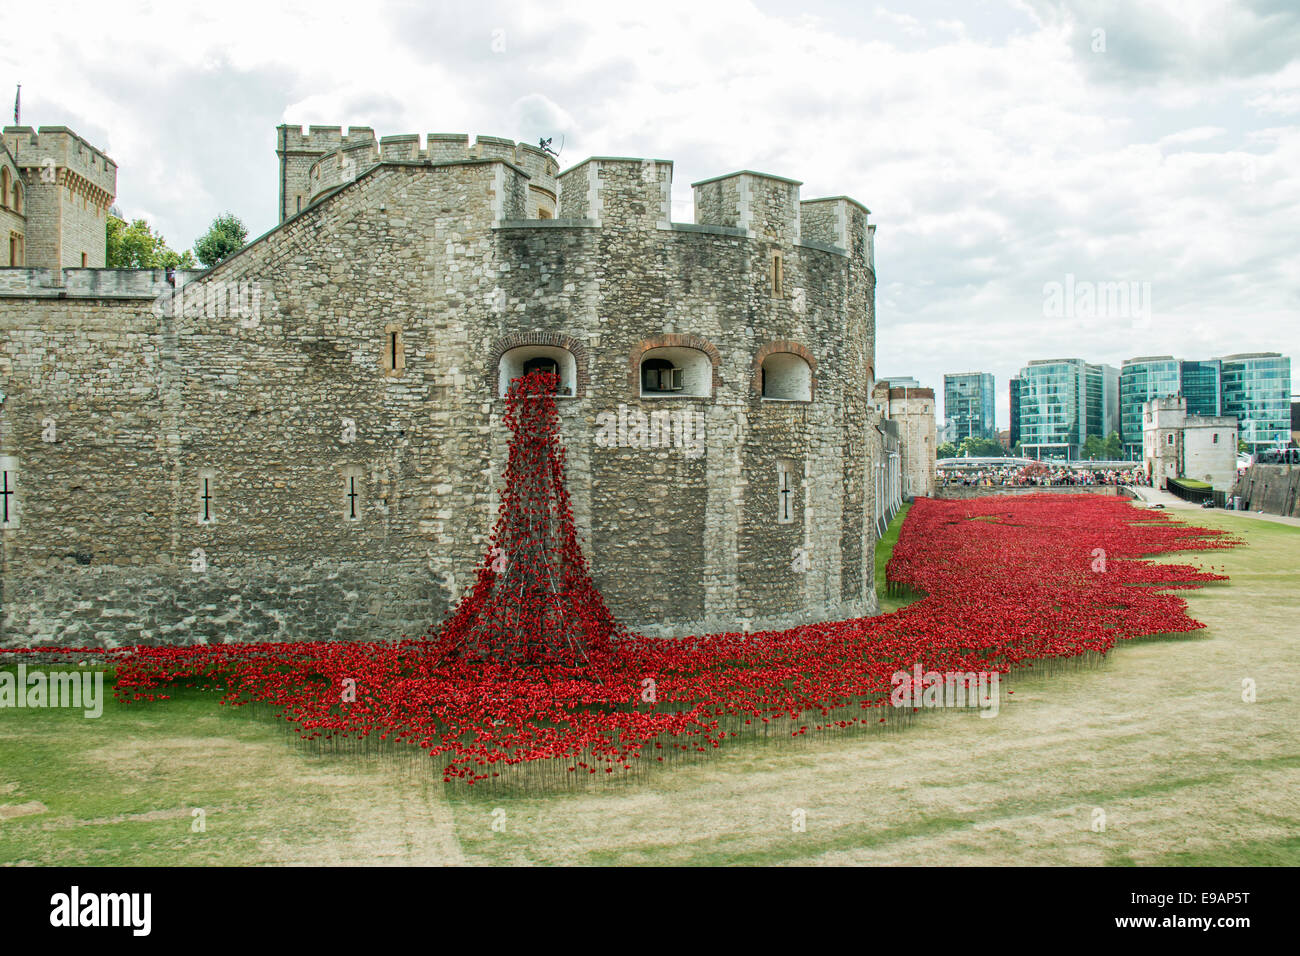 Tower of London display of ceramic poppies commemorating the fallen and the centenary of the start of the First World War. Stock Photo